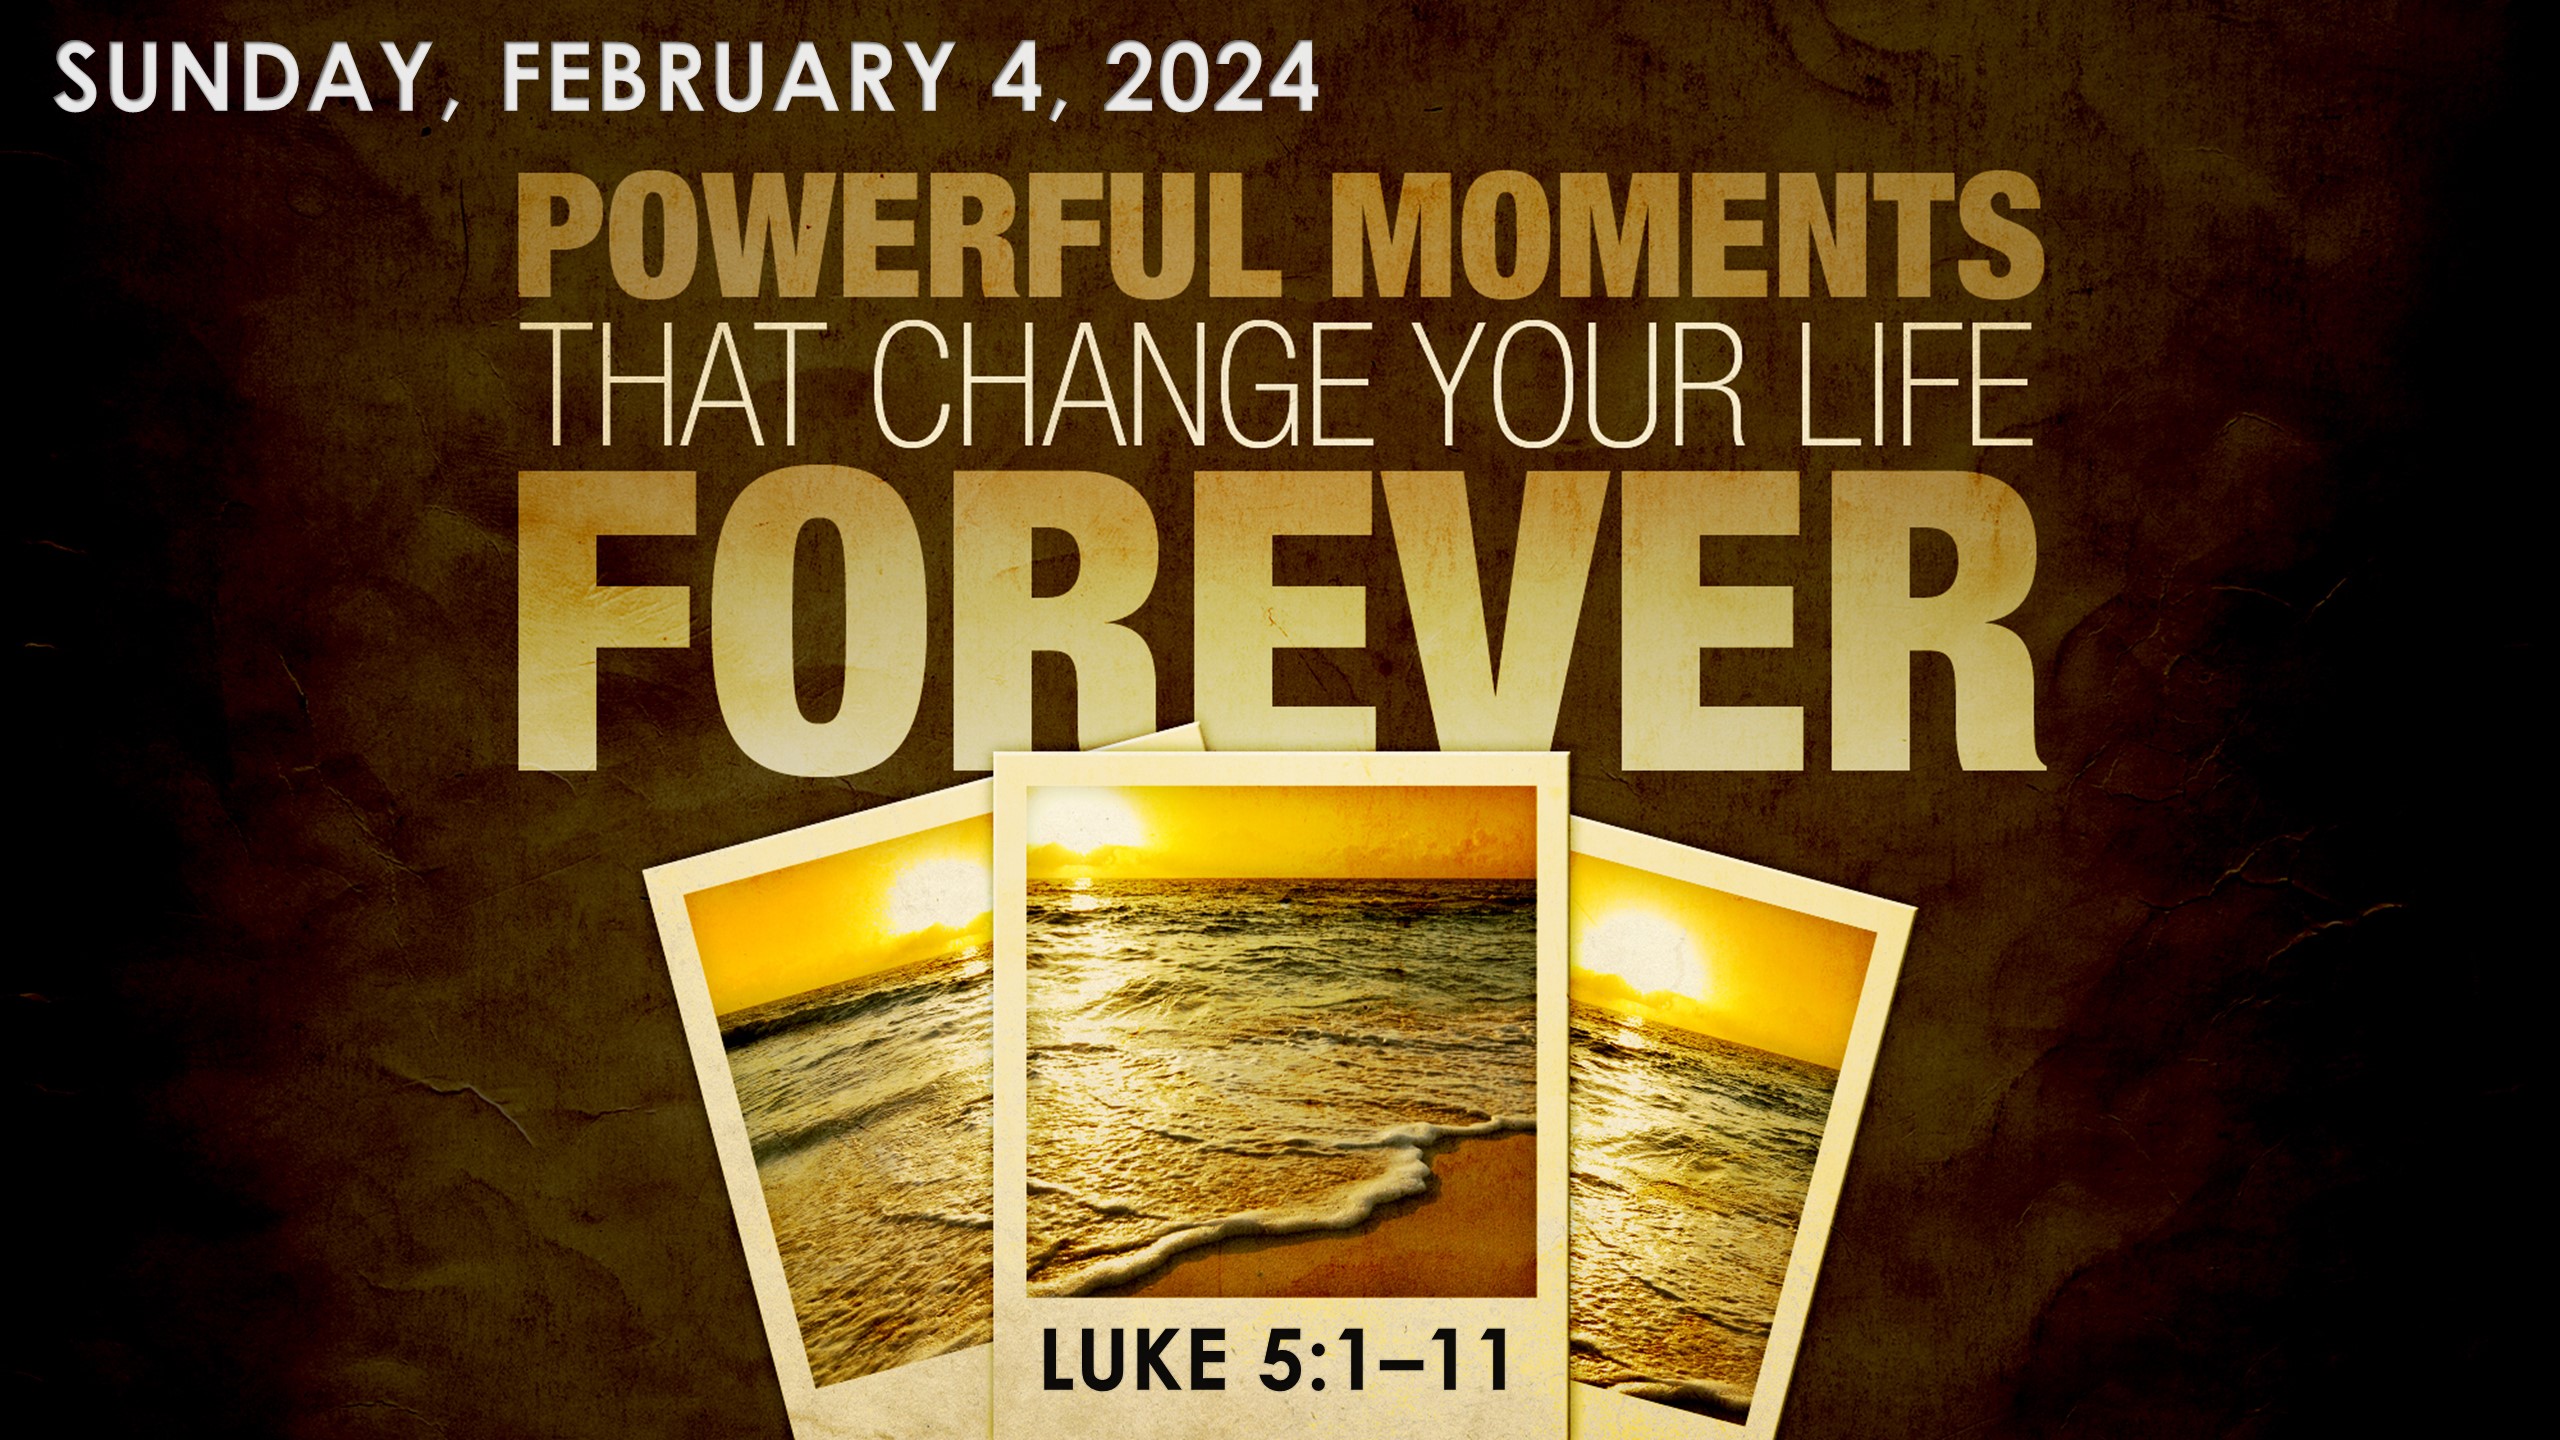 Powerful Moments That Change Your Life Forever